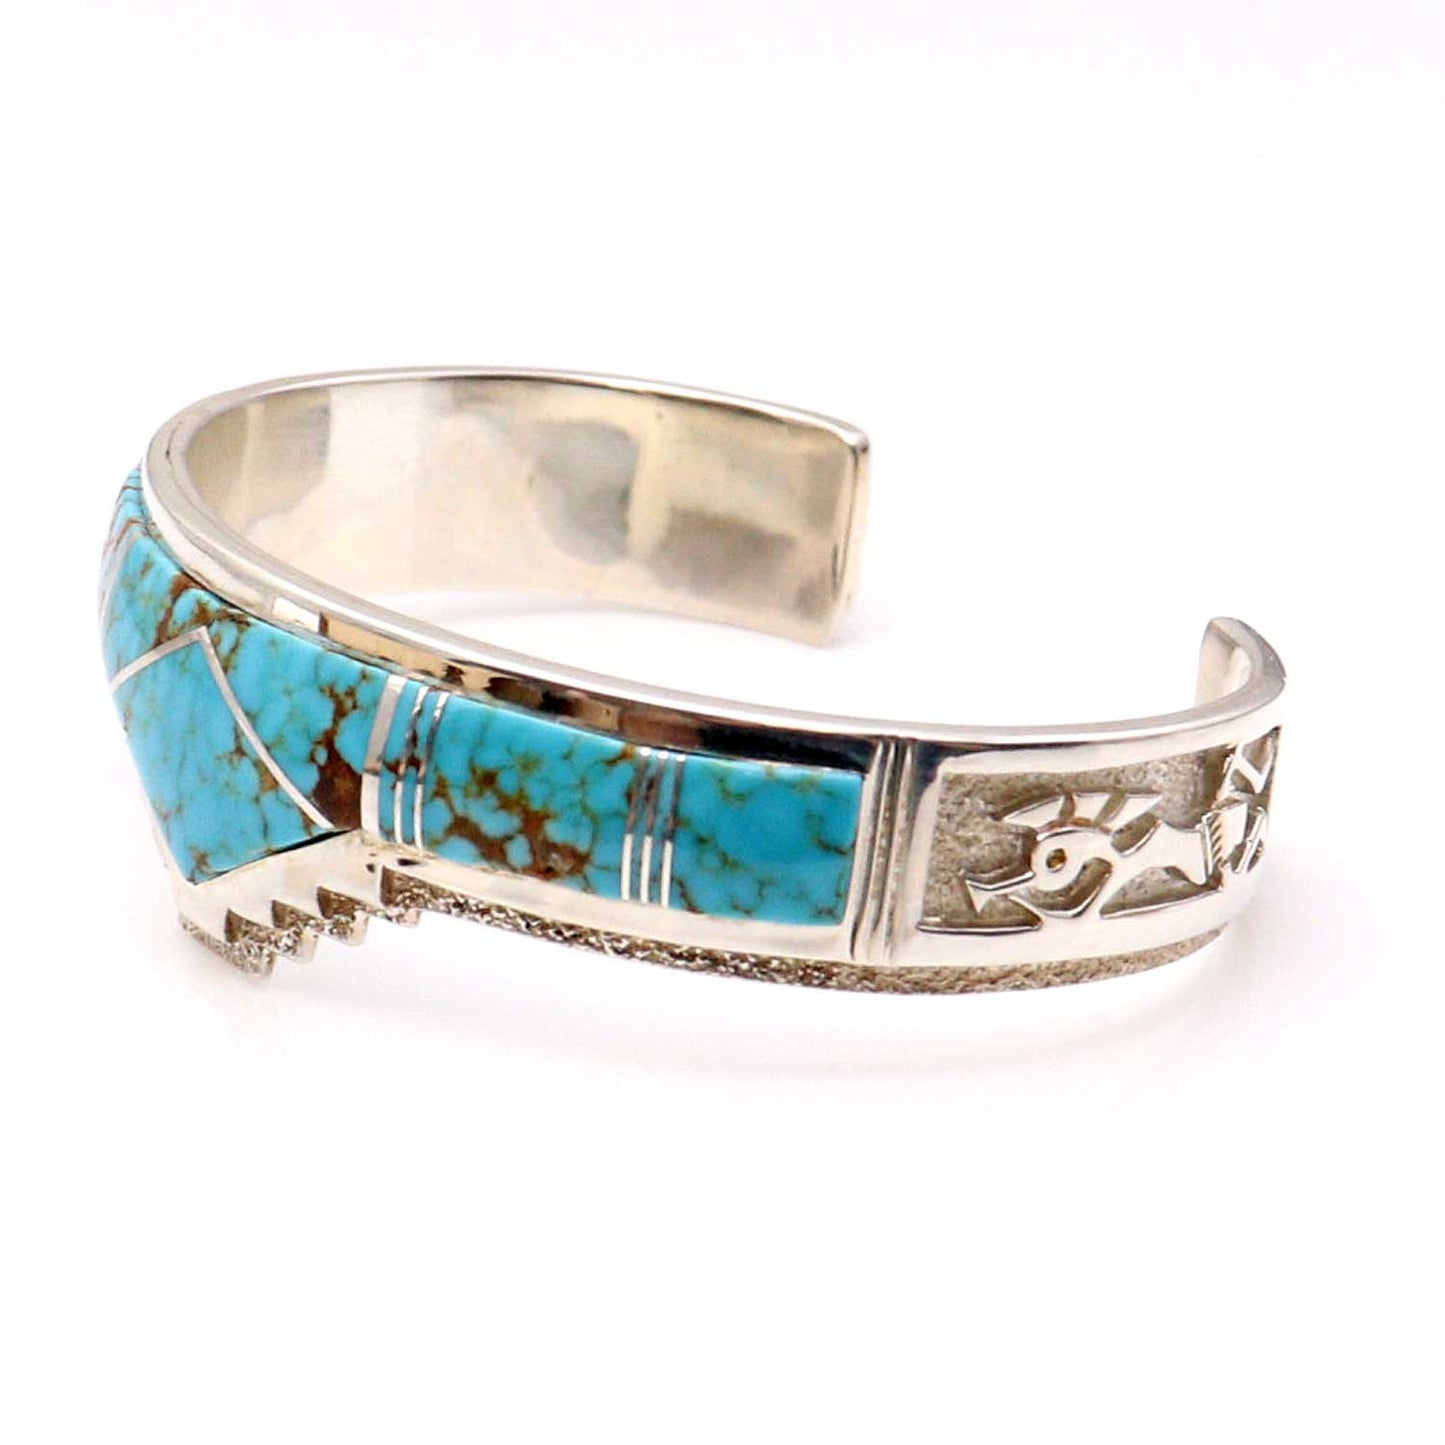 Load image into Gallery viewer, Number 8 Turquoise Inlaid Bracelet by Cecil Ashley
